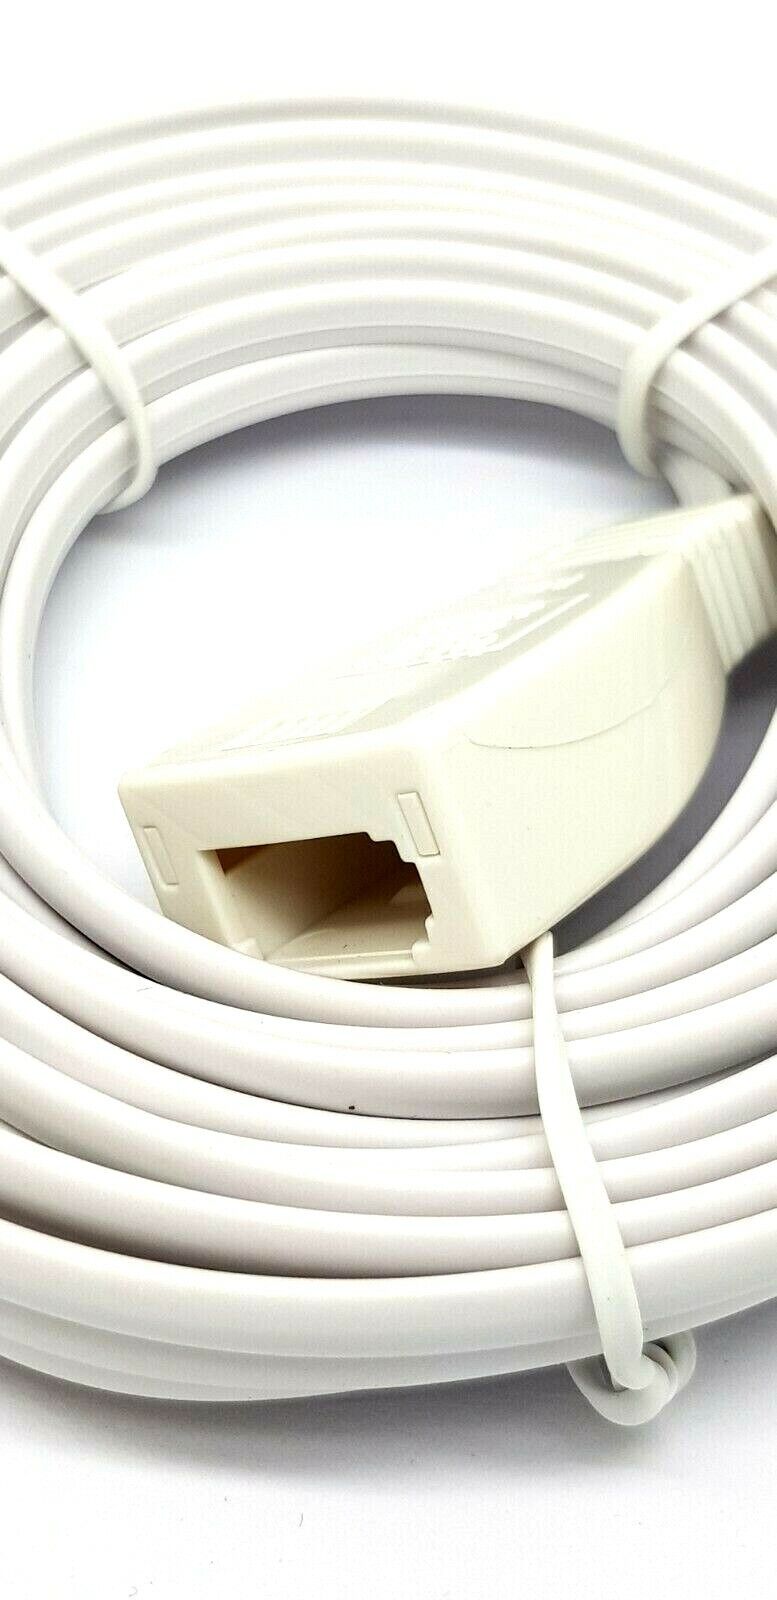 10m Telephone Extension Lead Cable HQ Flat Slimline Phone Line BT Virgin Fax